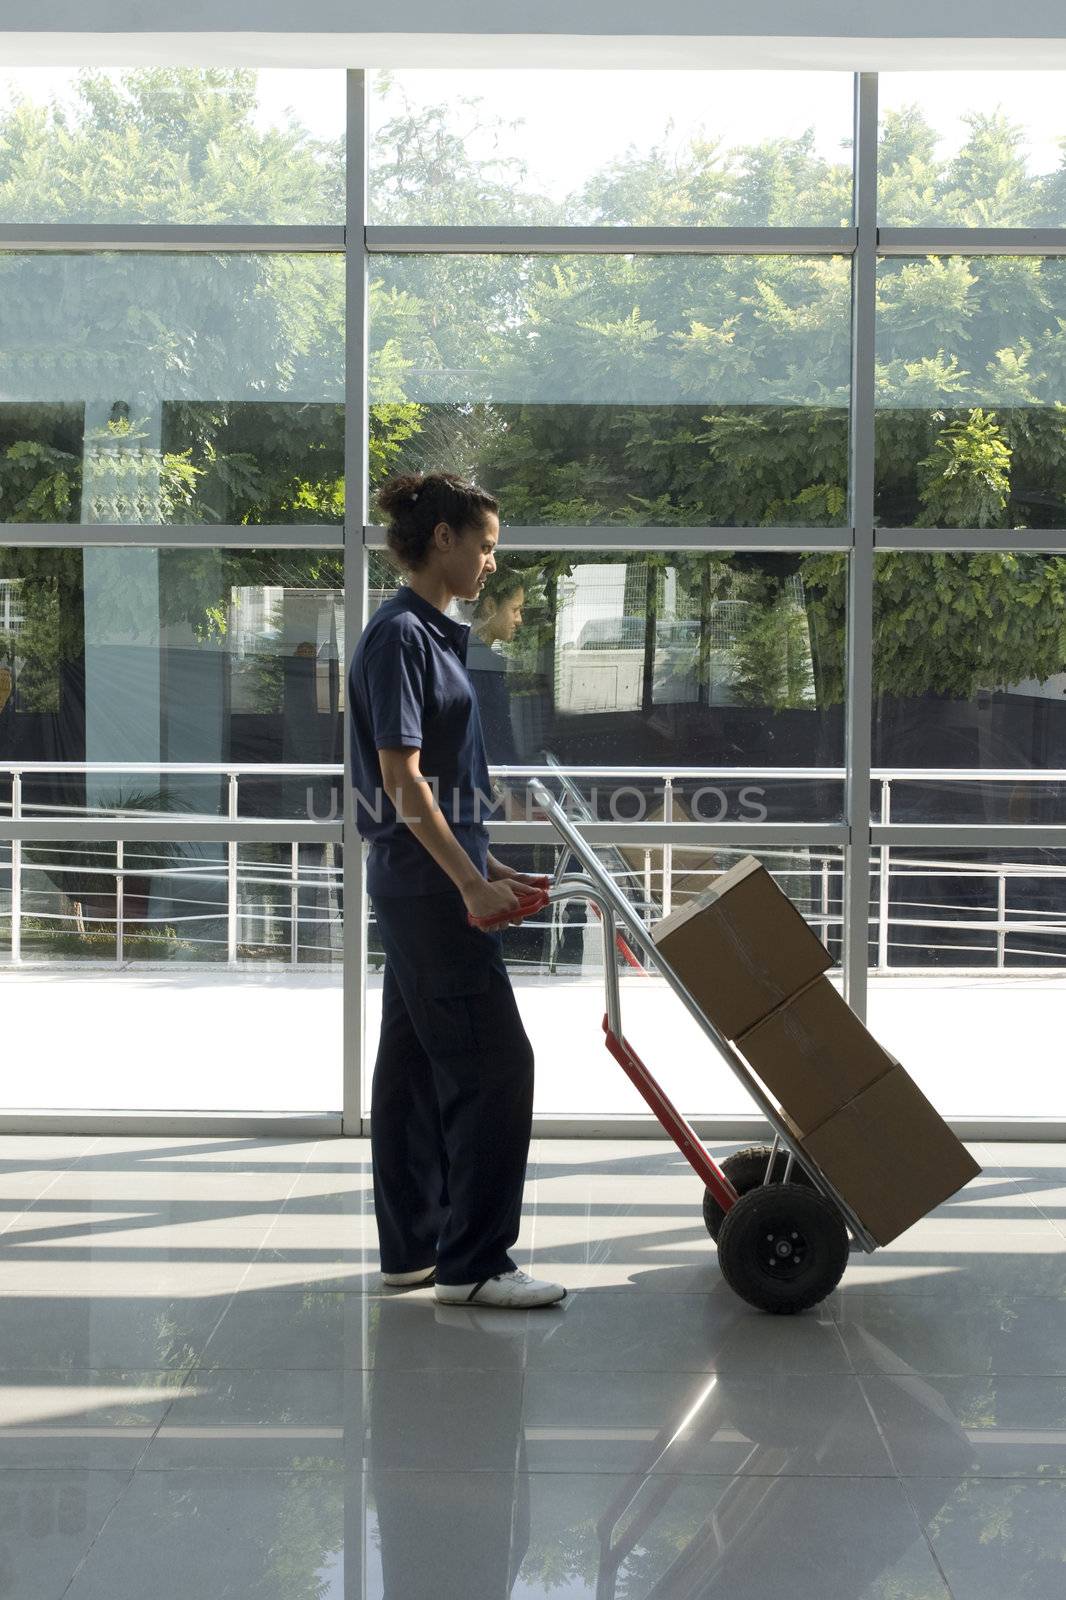 Side view of delivery woman in uniform pushing stack of cardboard boxes on dolly